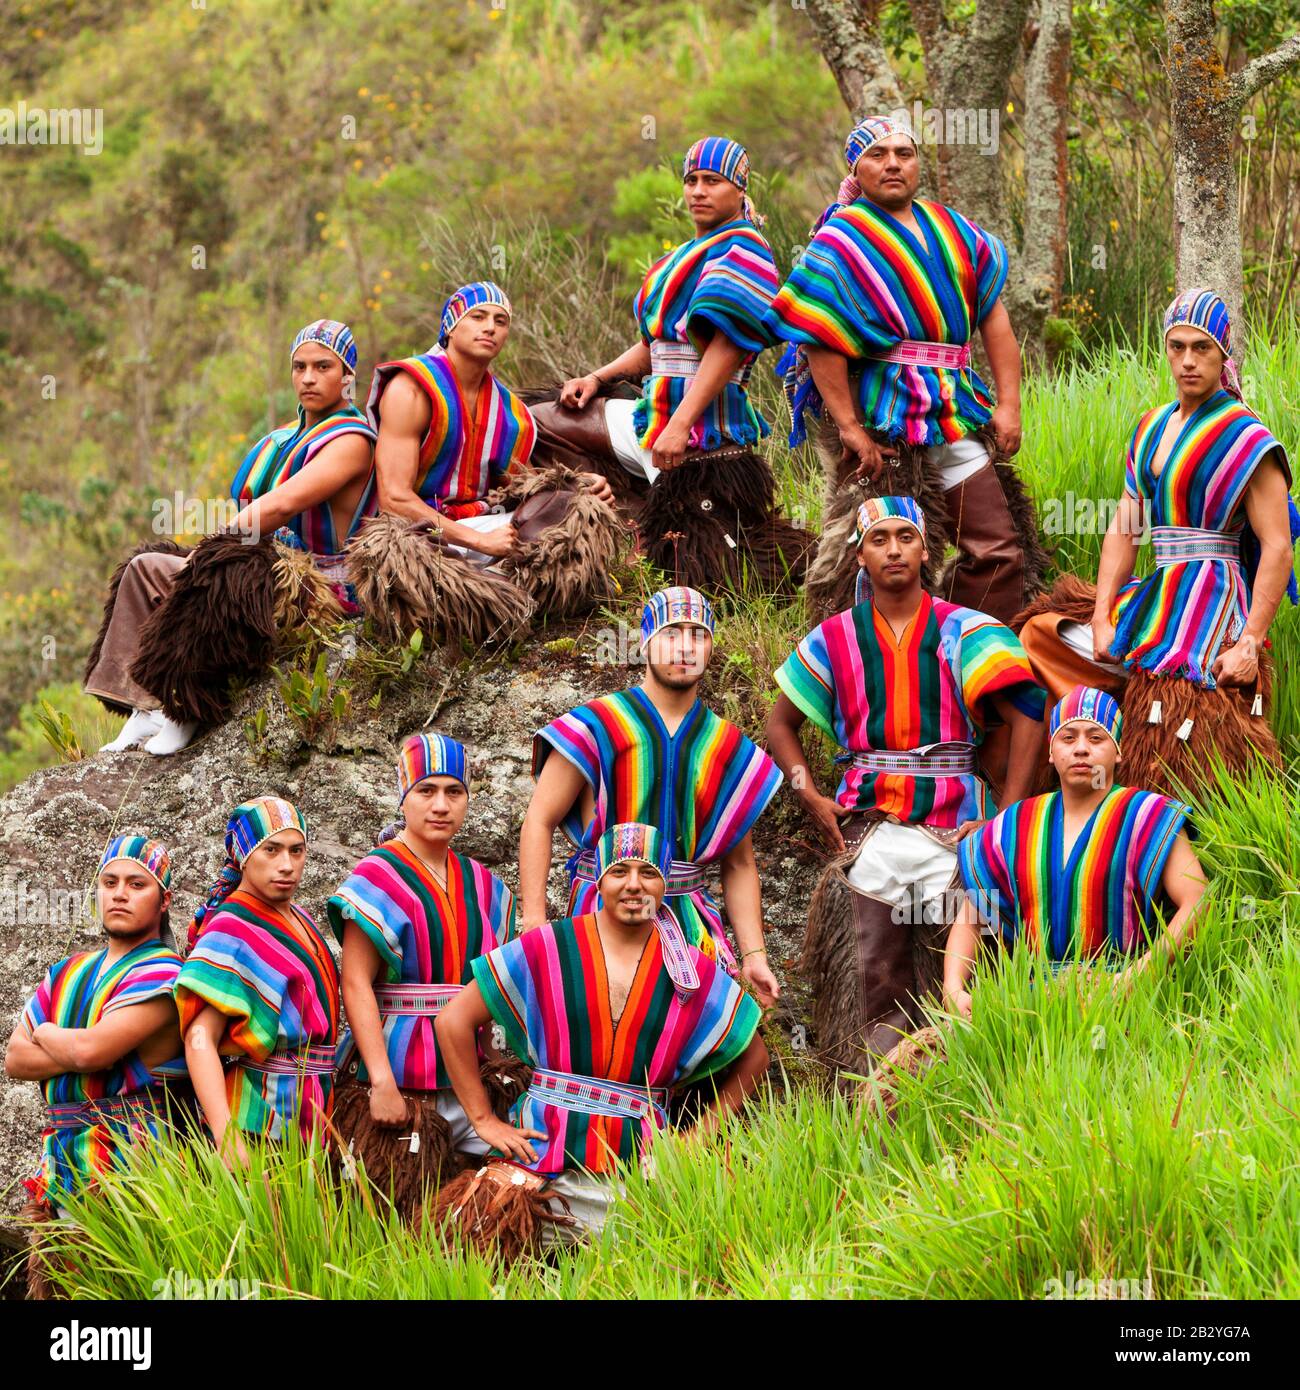 Ecuadorian Folkloric Community Dressed Up In Traditional Costumes Outdoor Shot Stock Photo